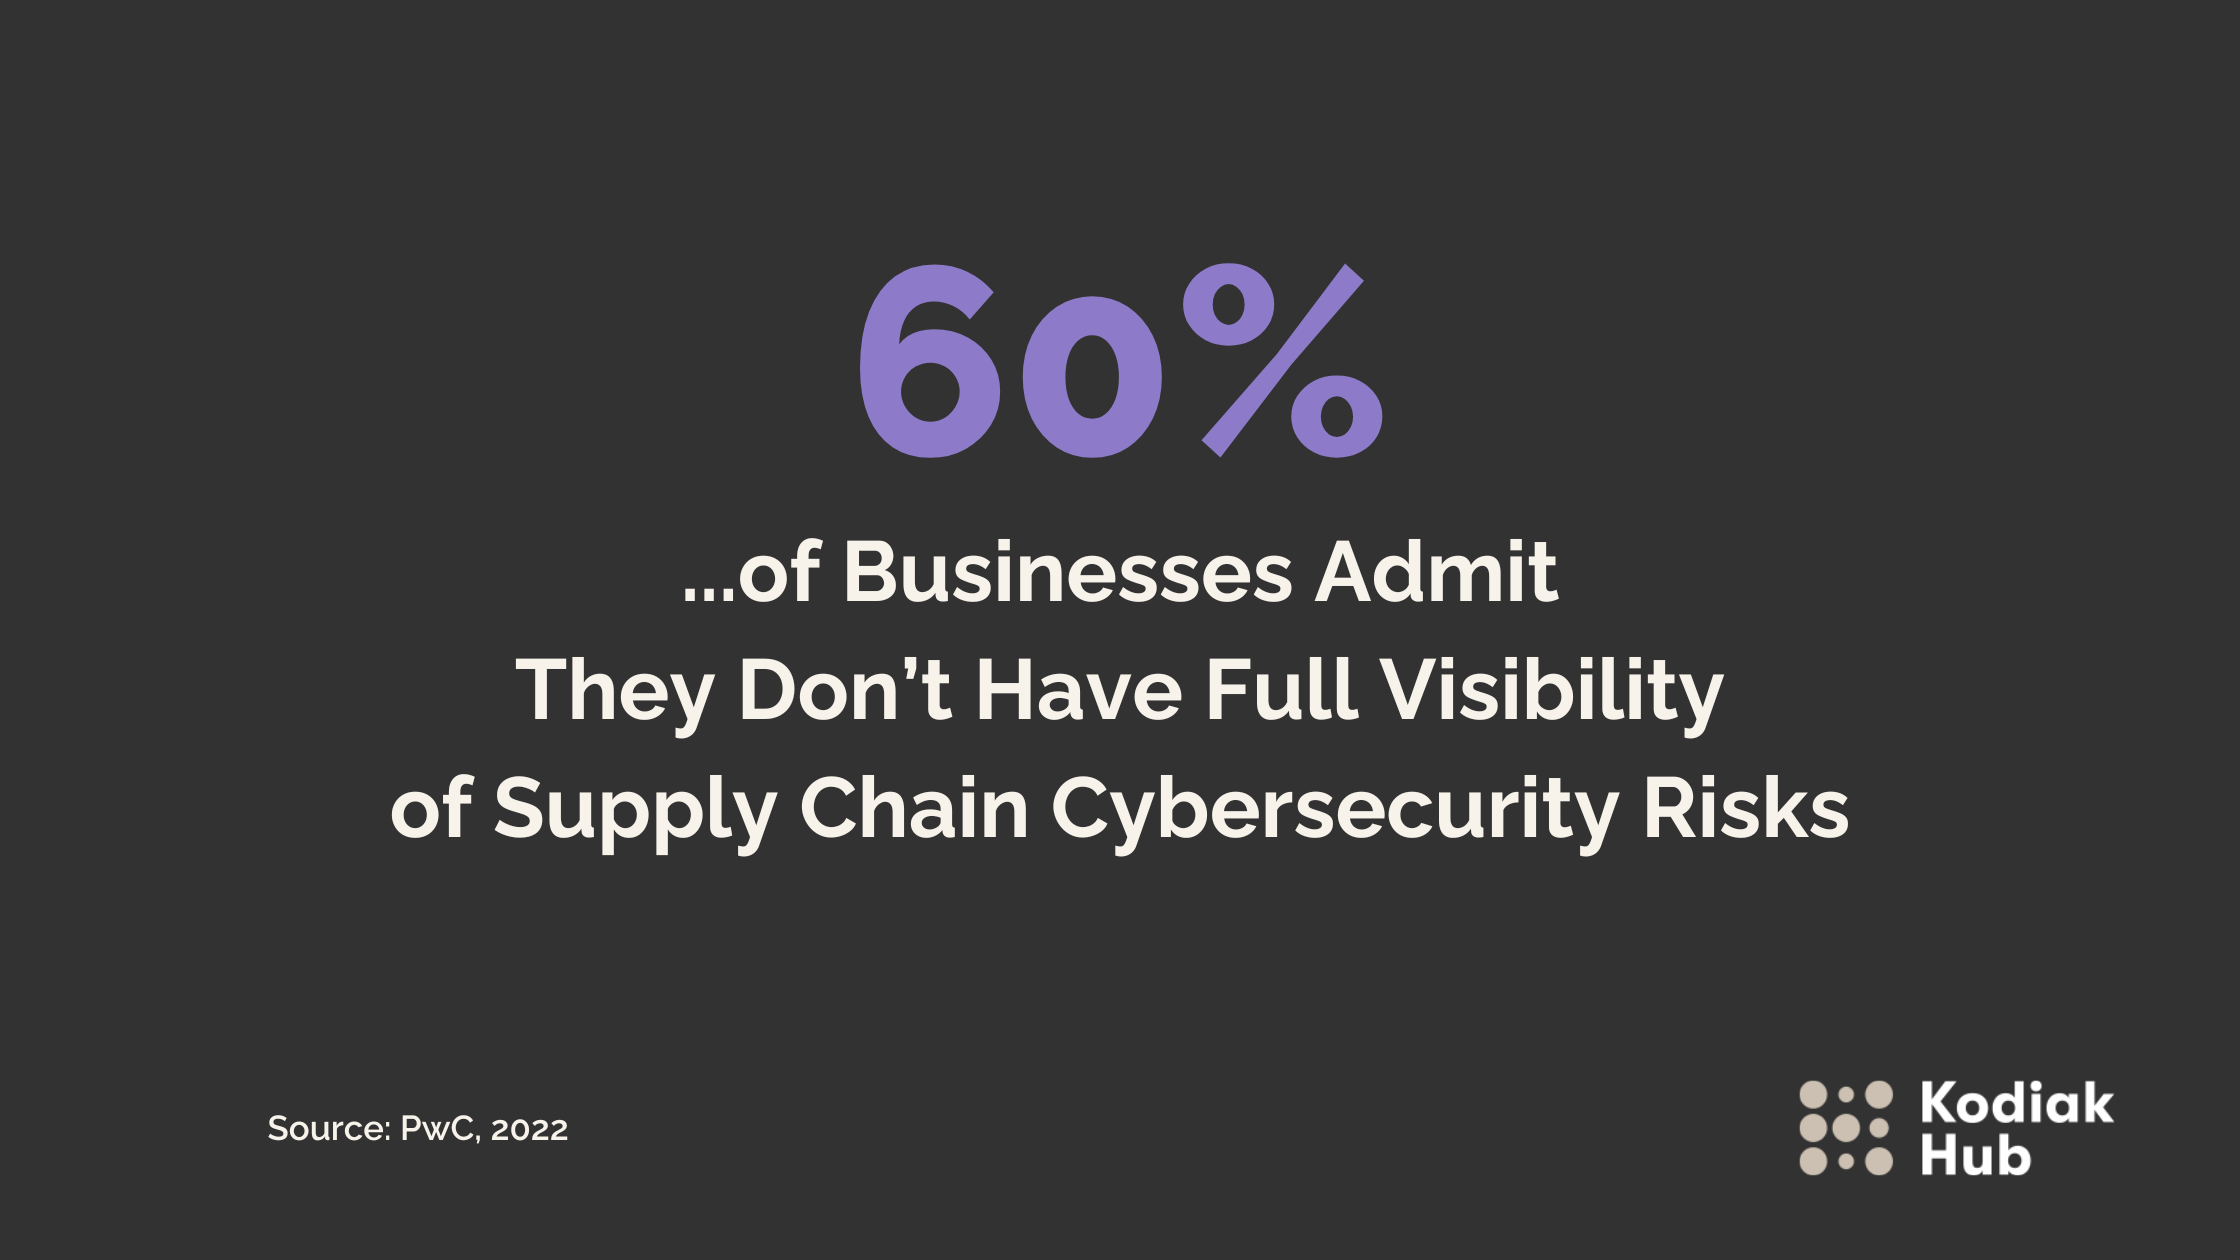 Managing Cyber Security Risks in Your Supply Chain